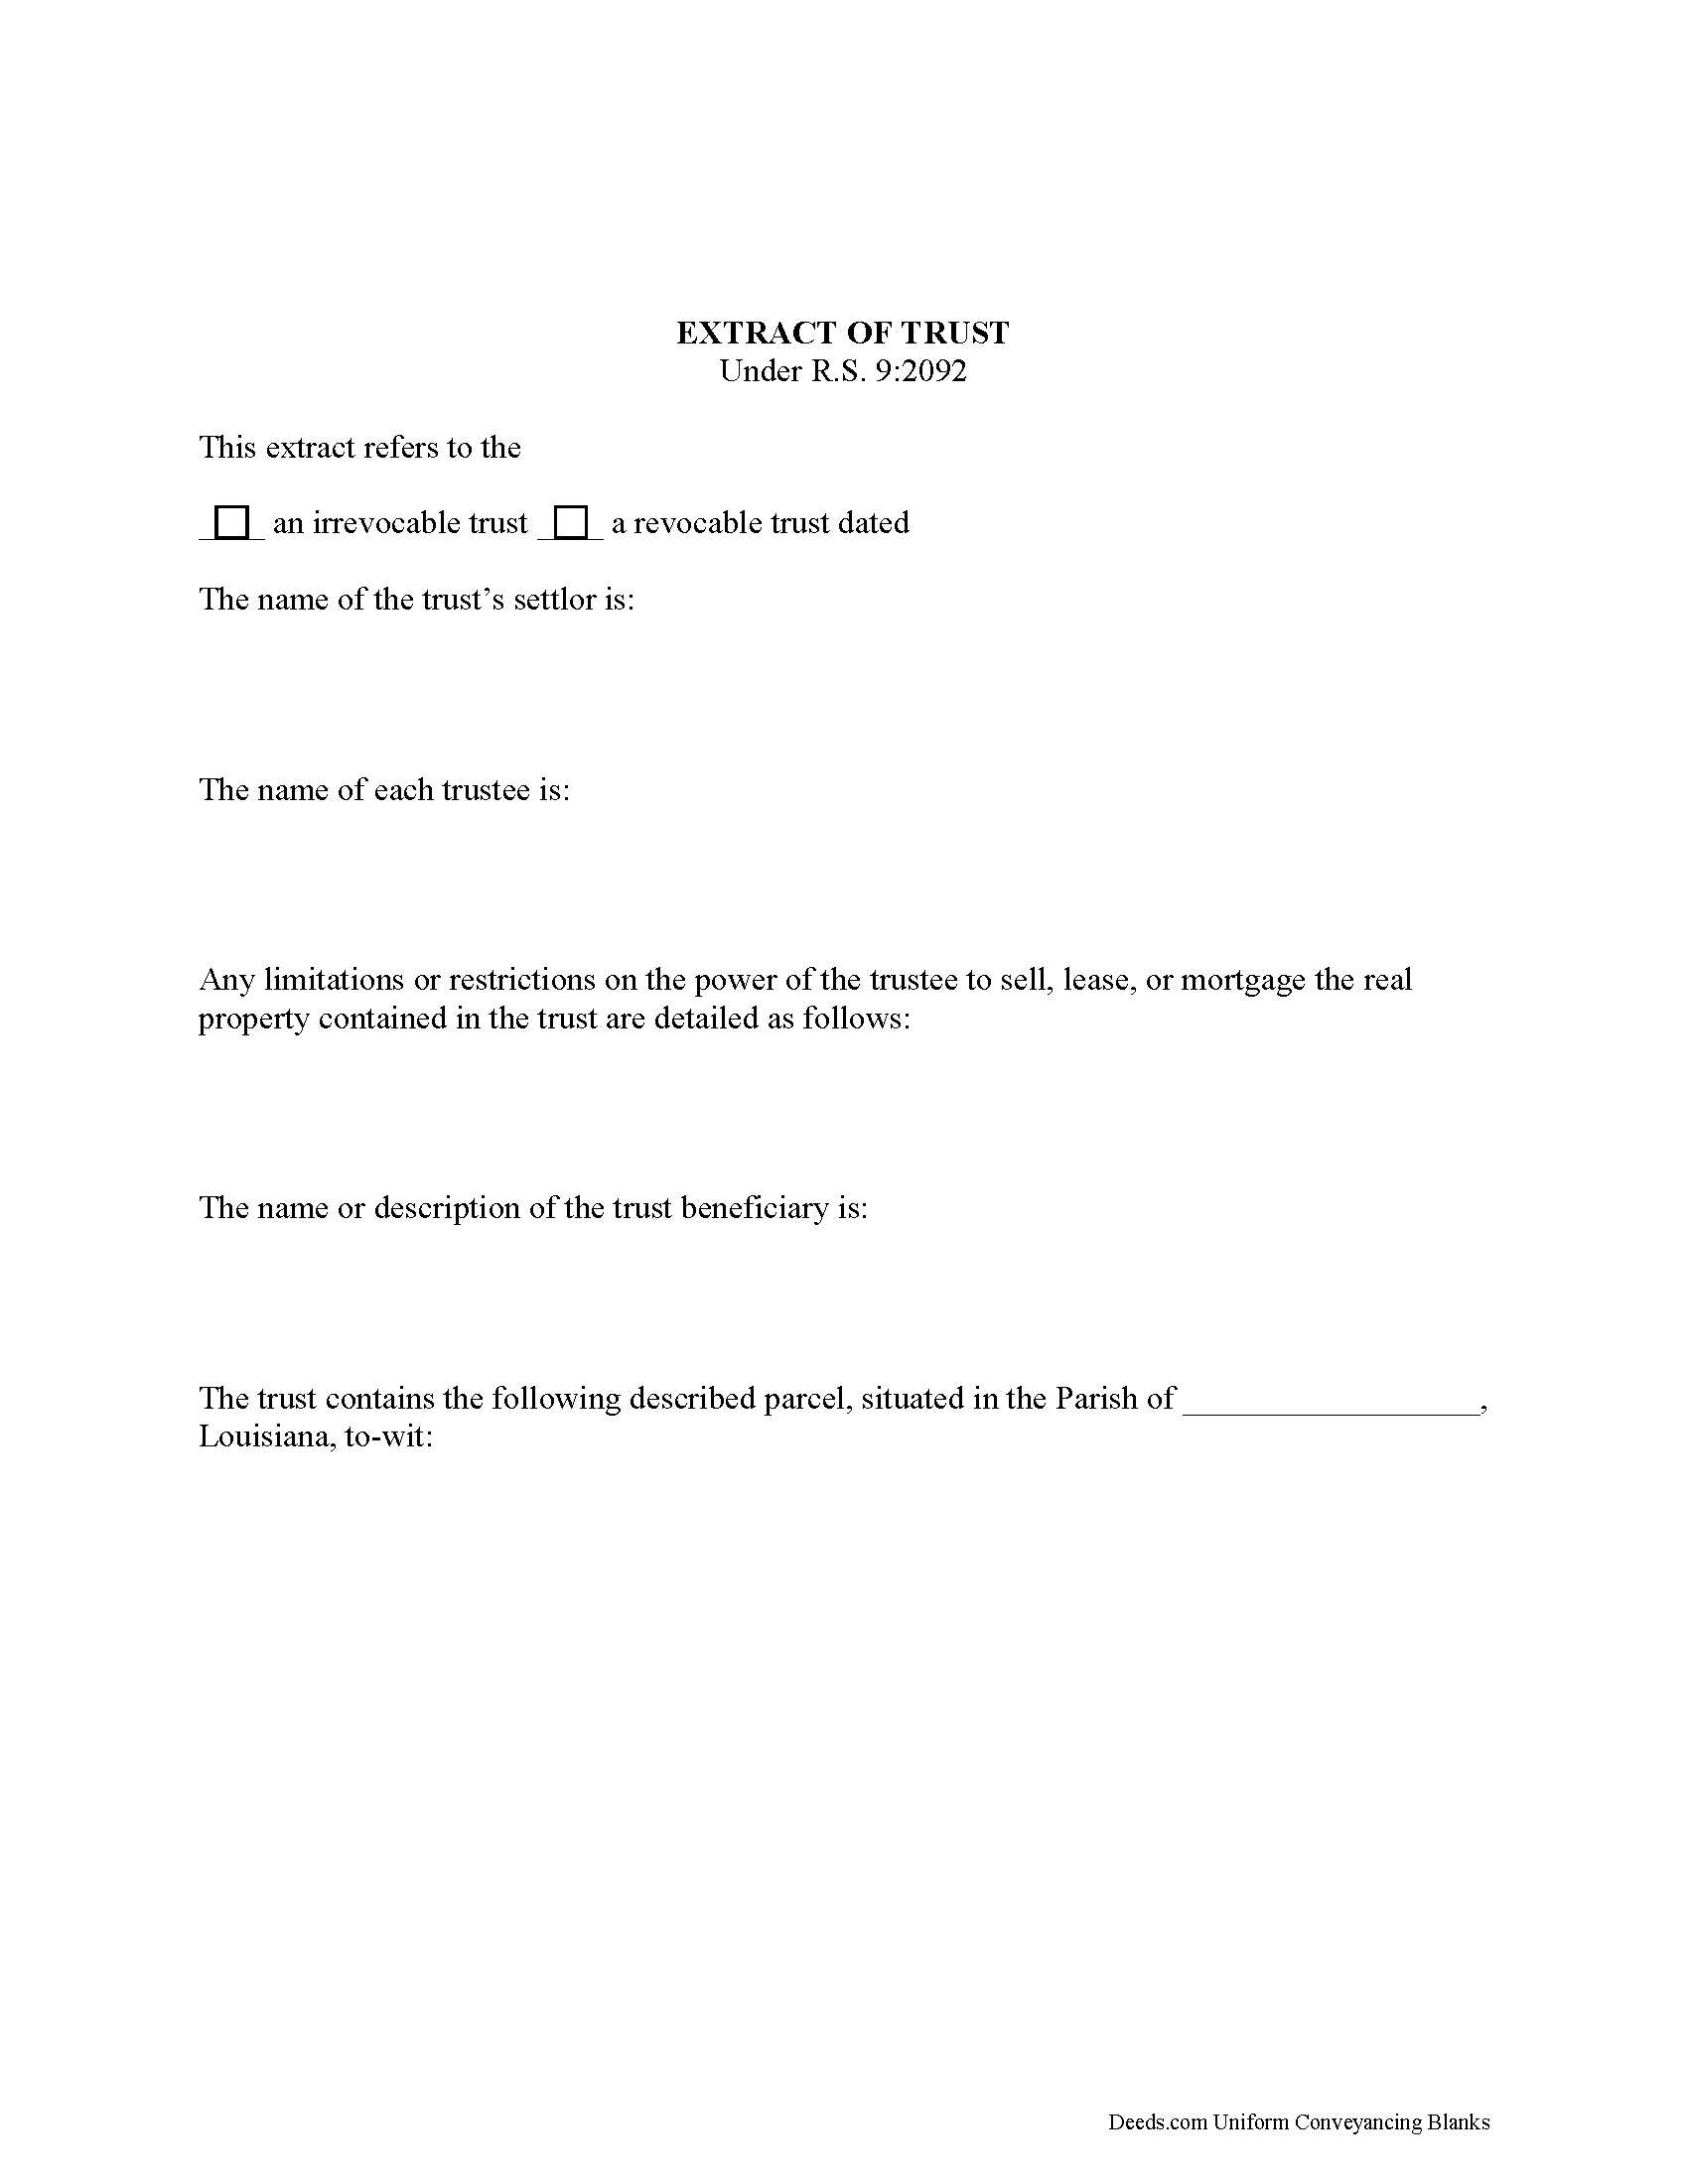 Extract of Trust Form